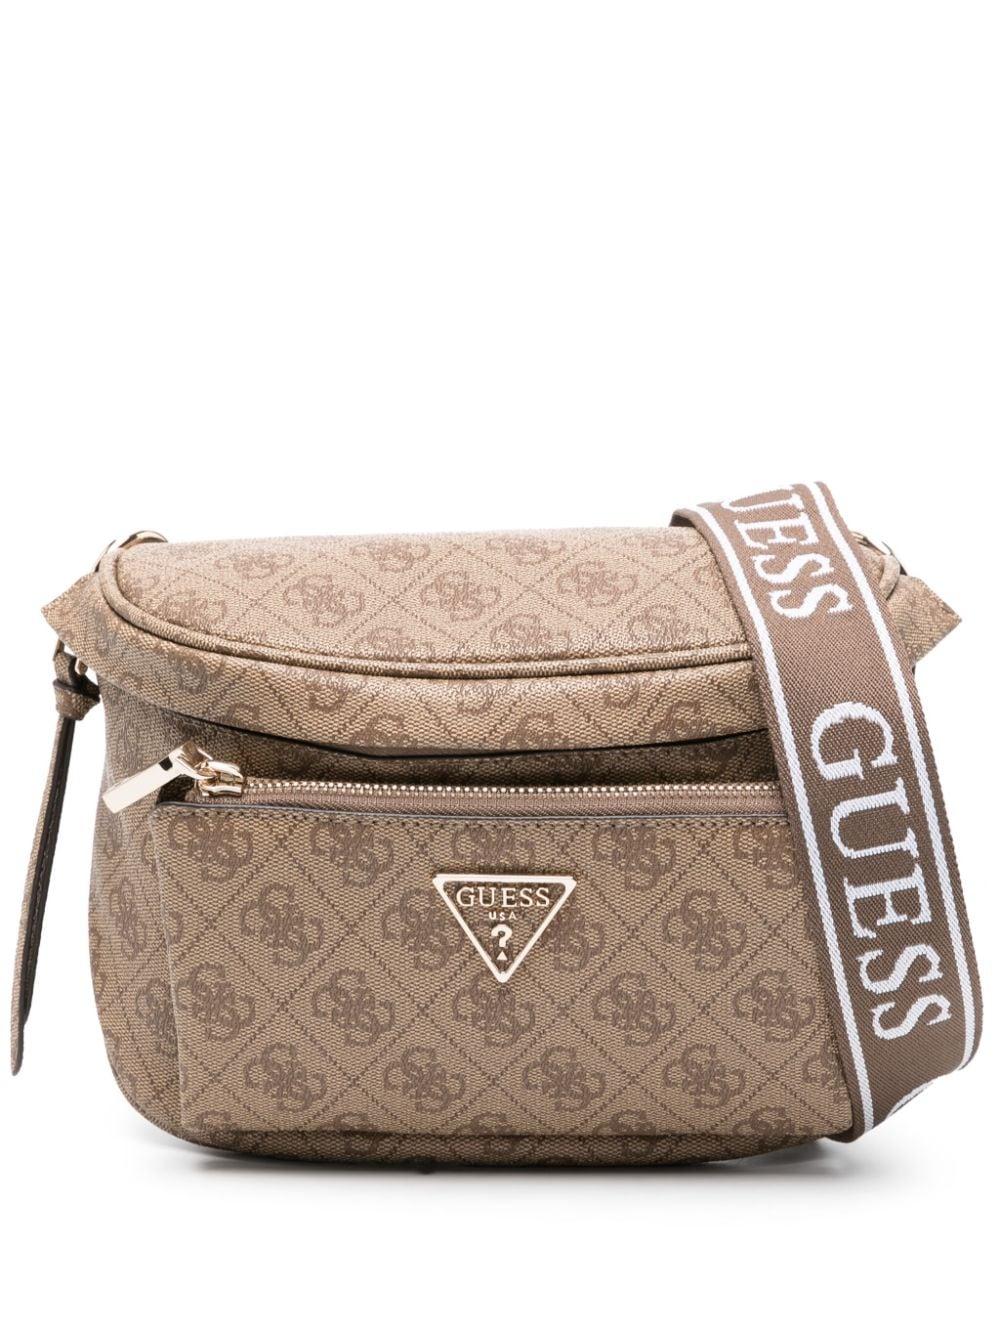 Guess USA Mini Power Play Shoulder Bag in Gray | Lyst